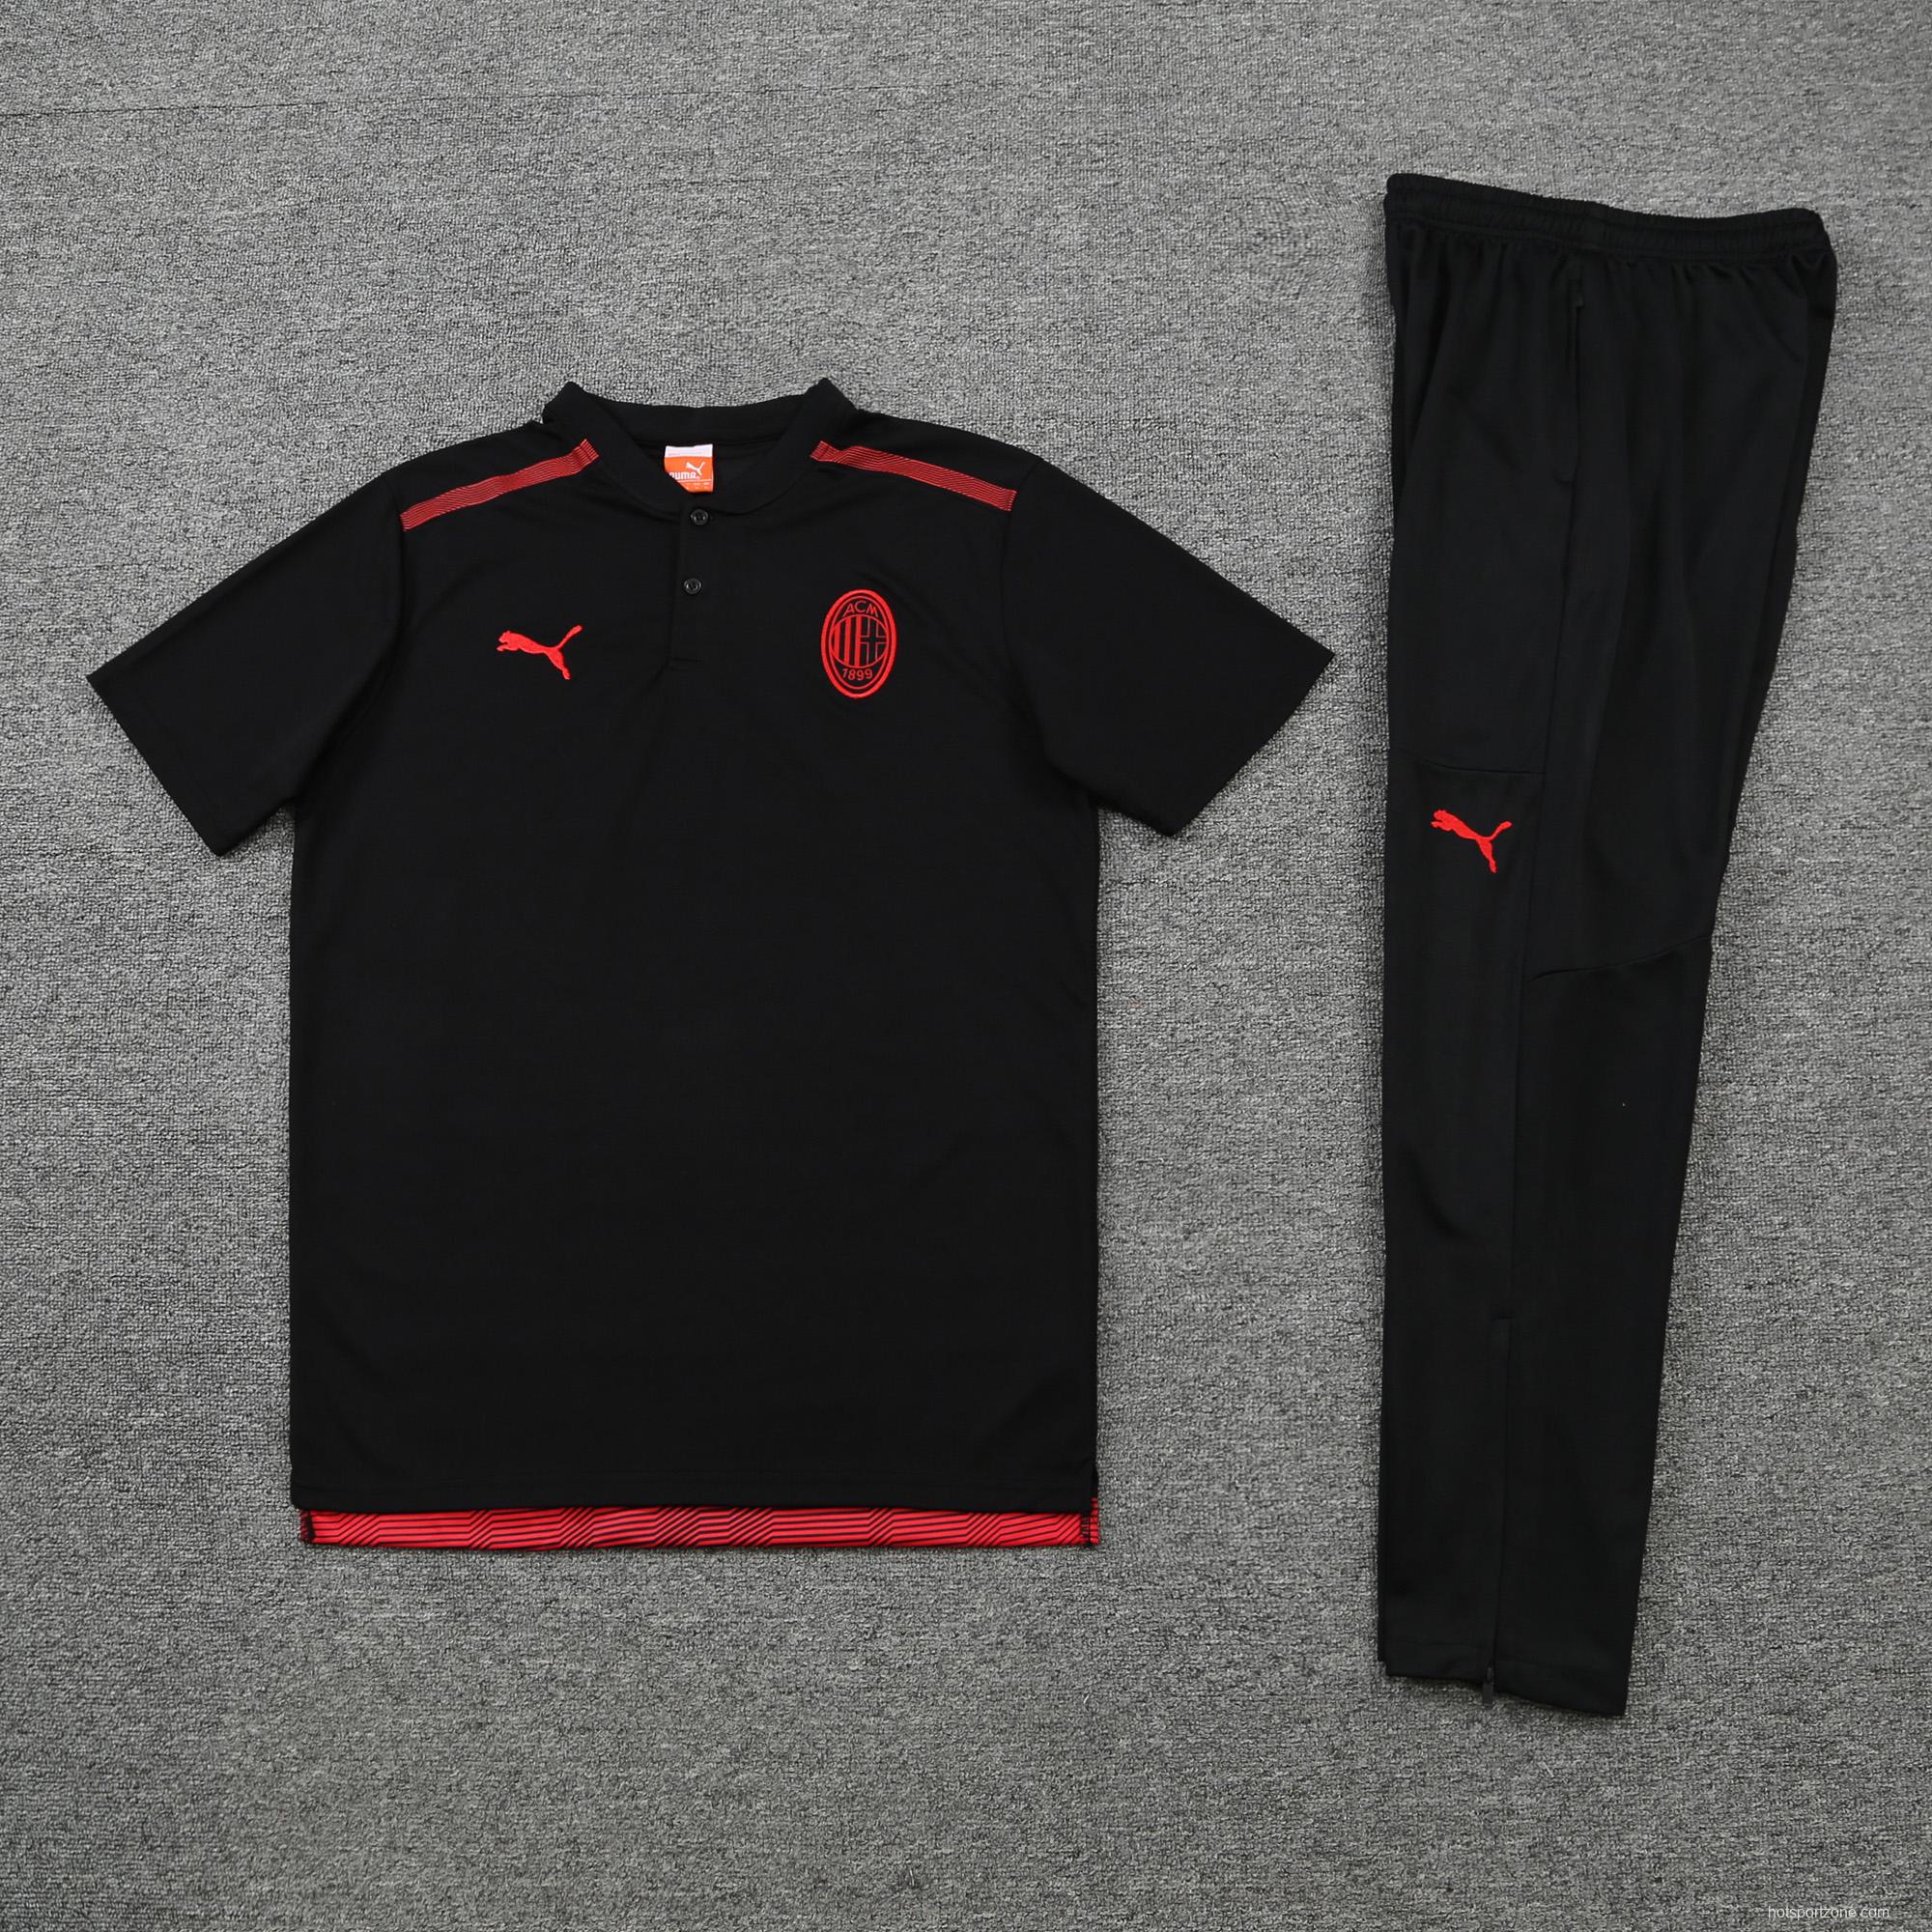 A.C. Milan POLO kit Black (not supported to be sold separately)